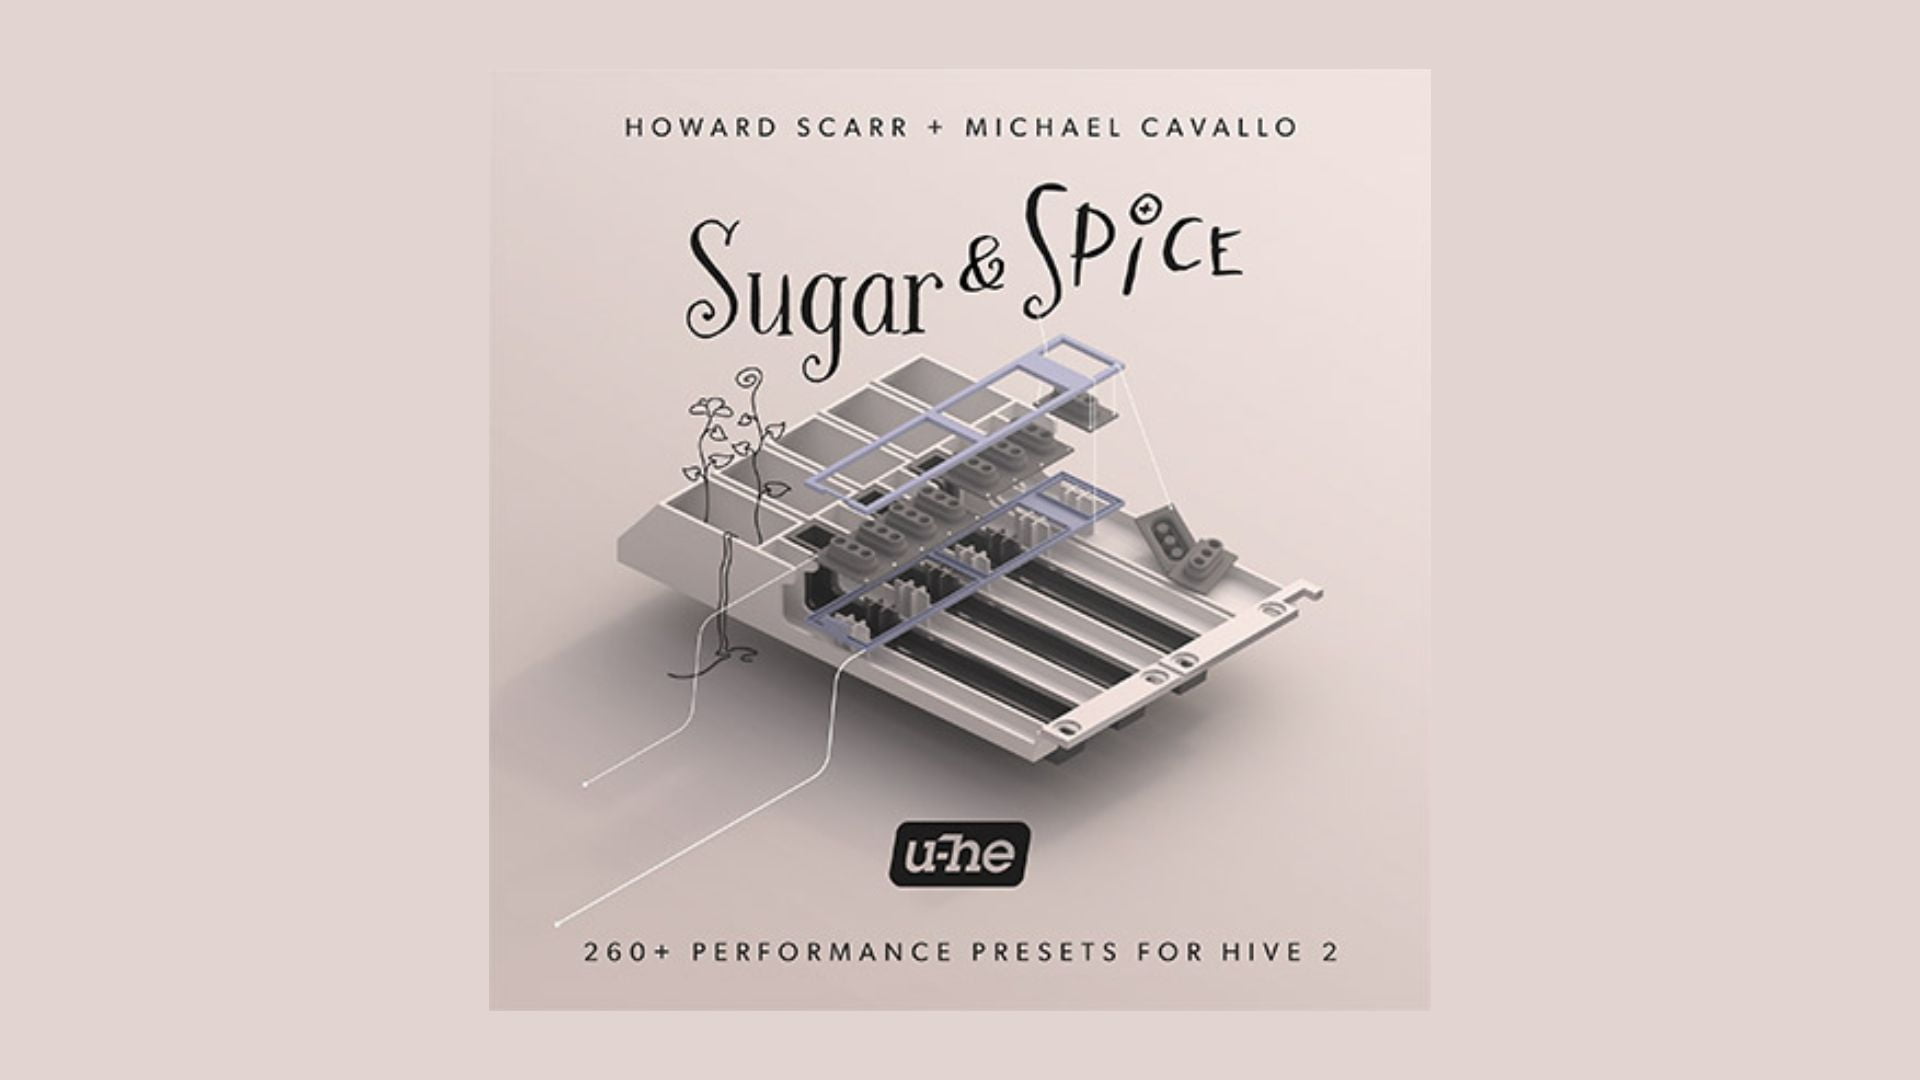 U-He Releases Retro-Inspired Sugar & Spice for Hive 2